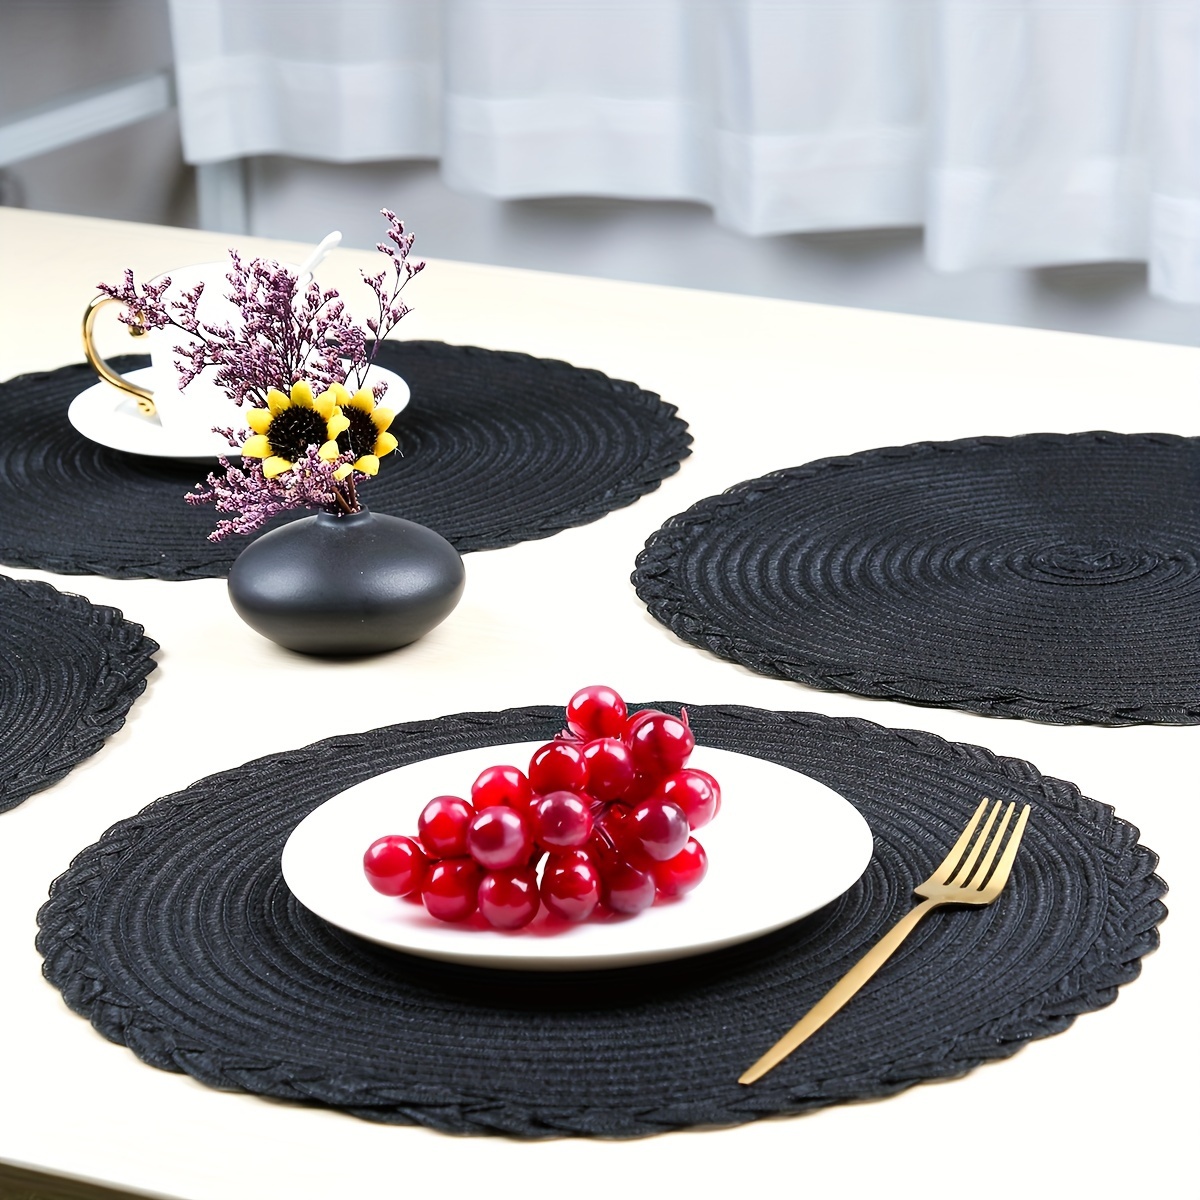 

4-piece Set Black Non-slip Round Woven Coasters - Versatile Placemats For Dining & Kitchen, Perfect For Weddings, Parties, And Home Decor